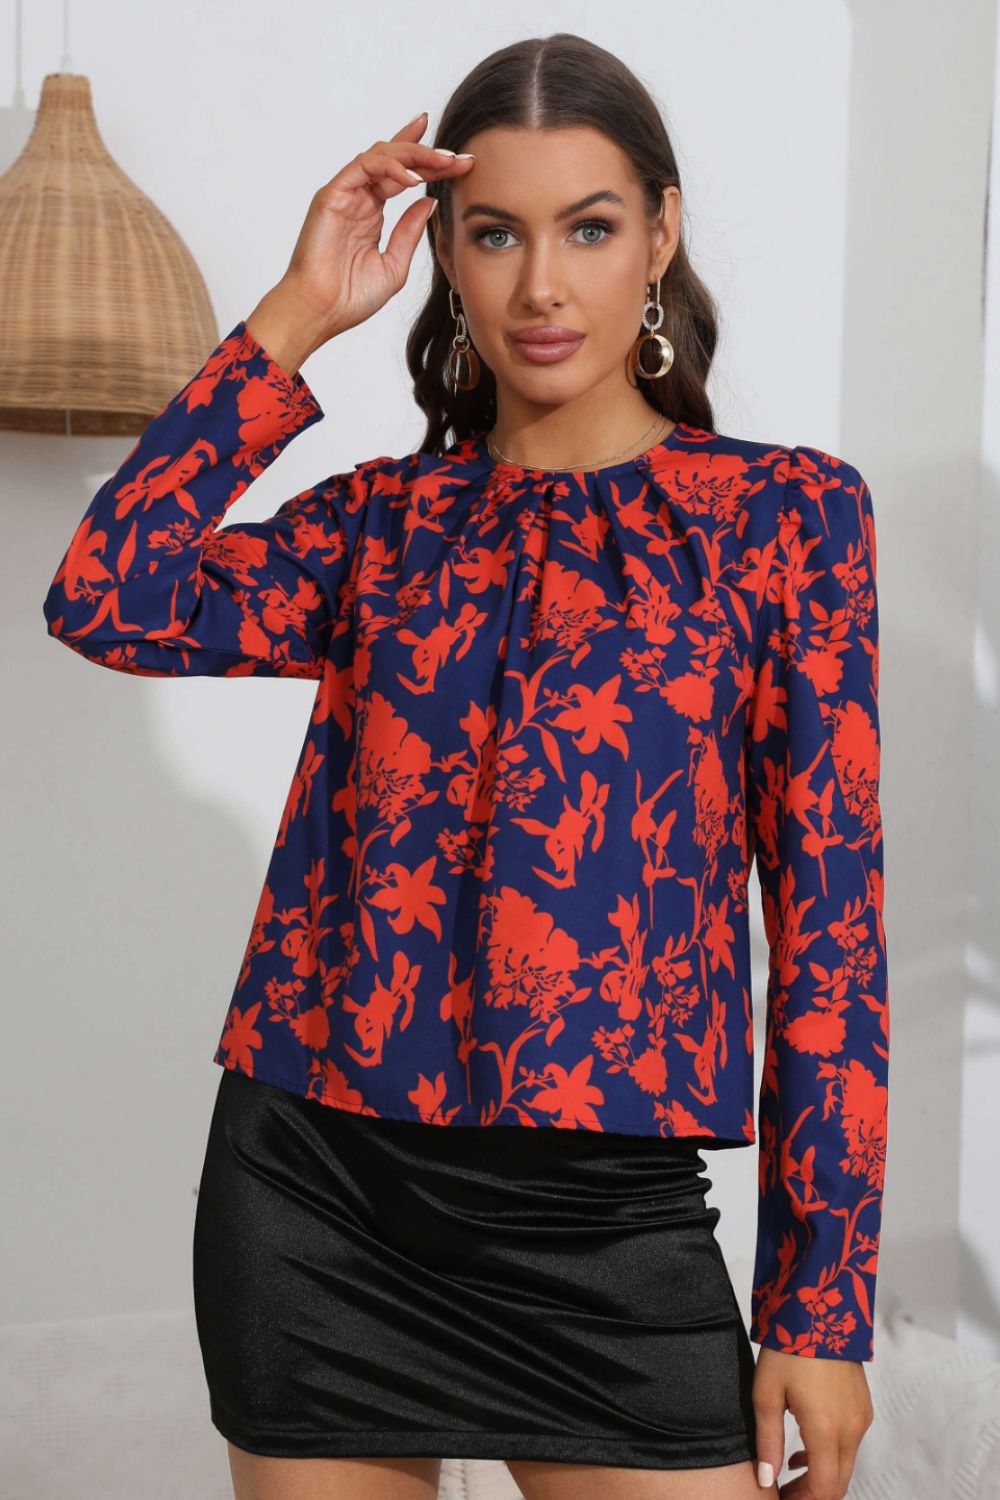 Von Fleur Floral 80's Graphic Red & Navy Floral Long Sleeve Blouse